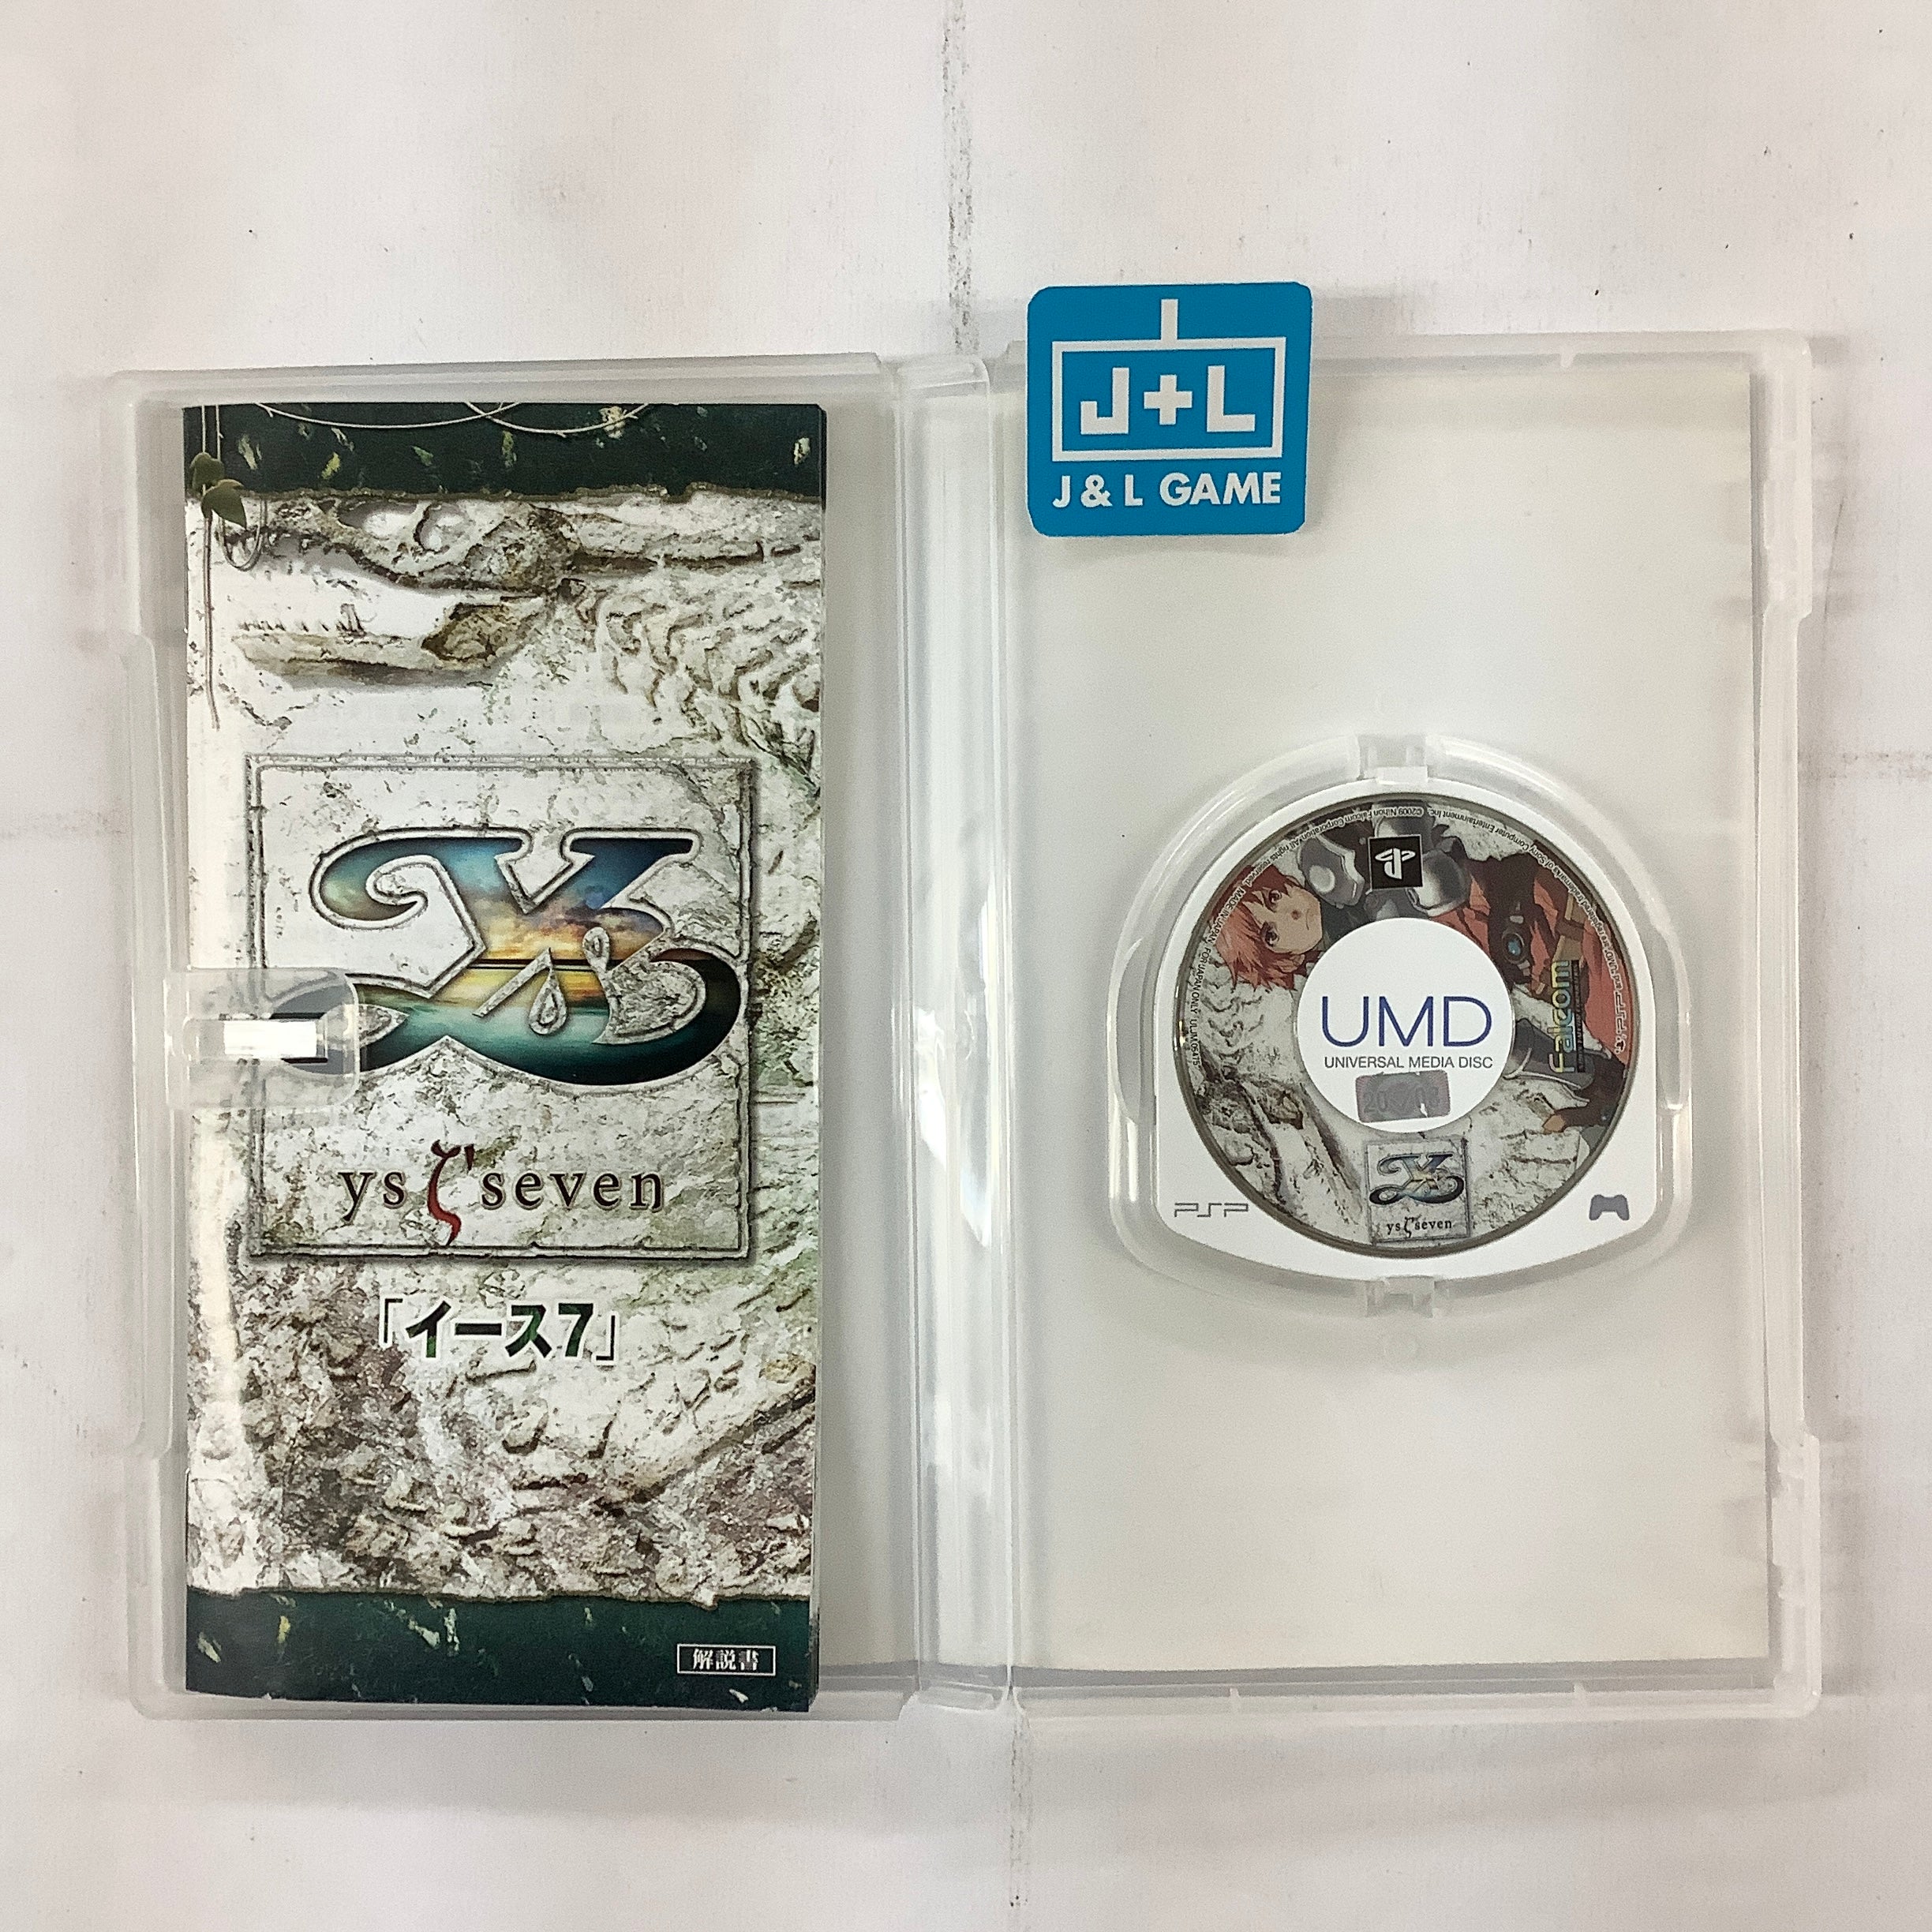 Ys Seven - Sony PSP [Pre-Owned] (Japanese Import) Video Games Falcom   